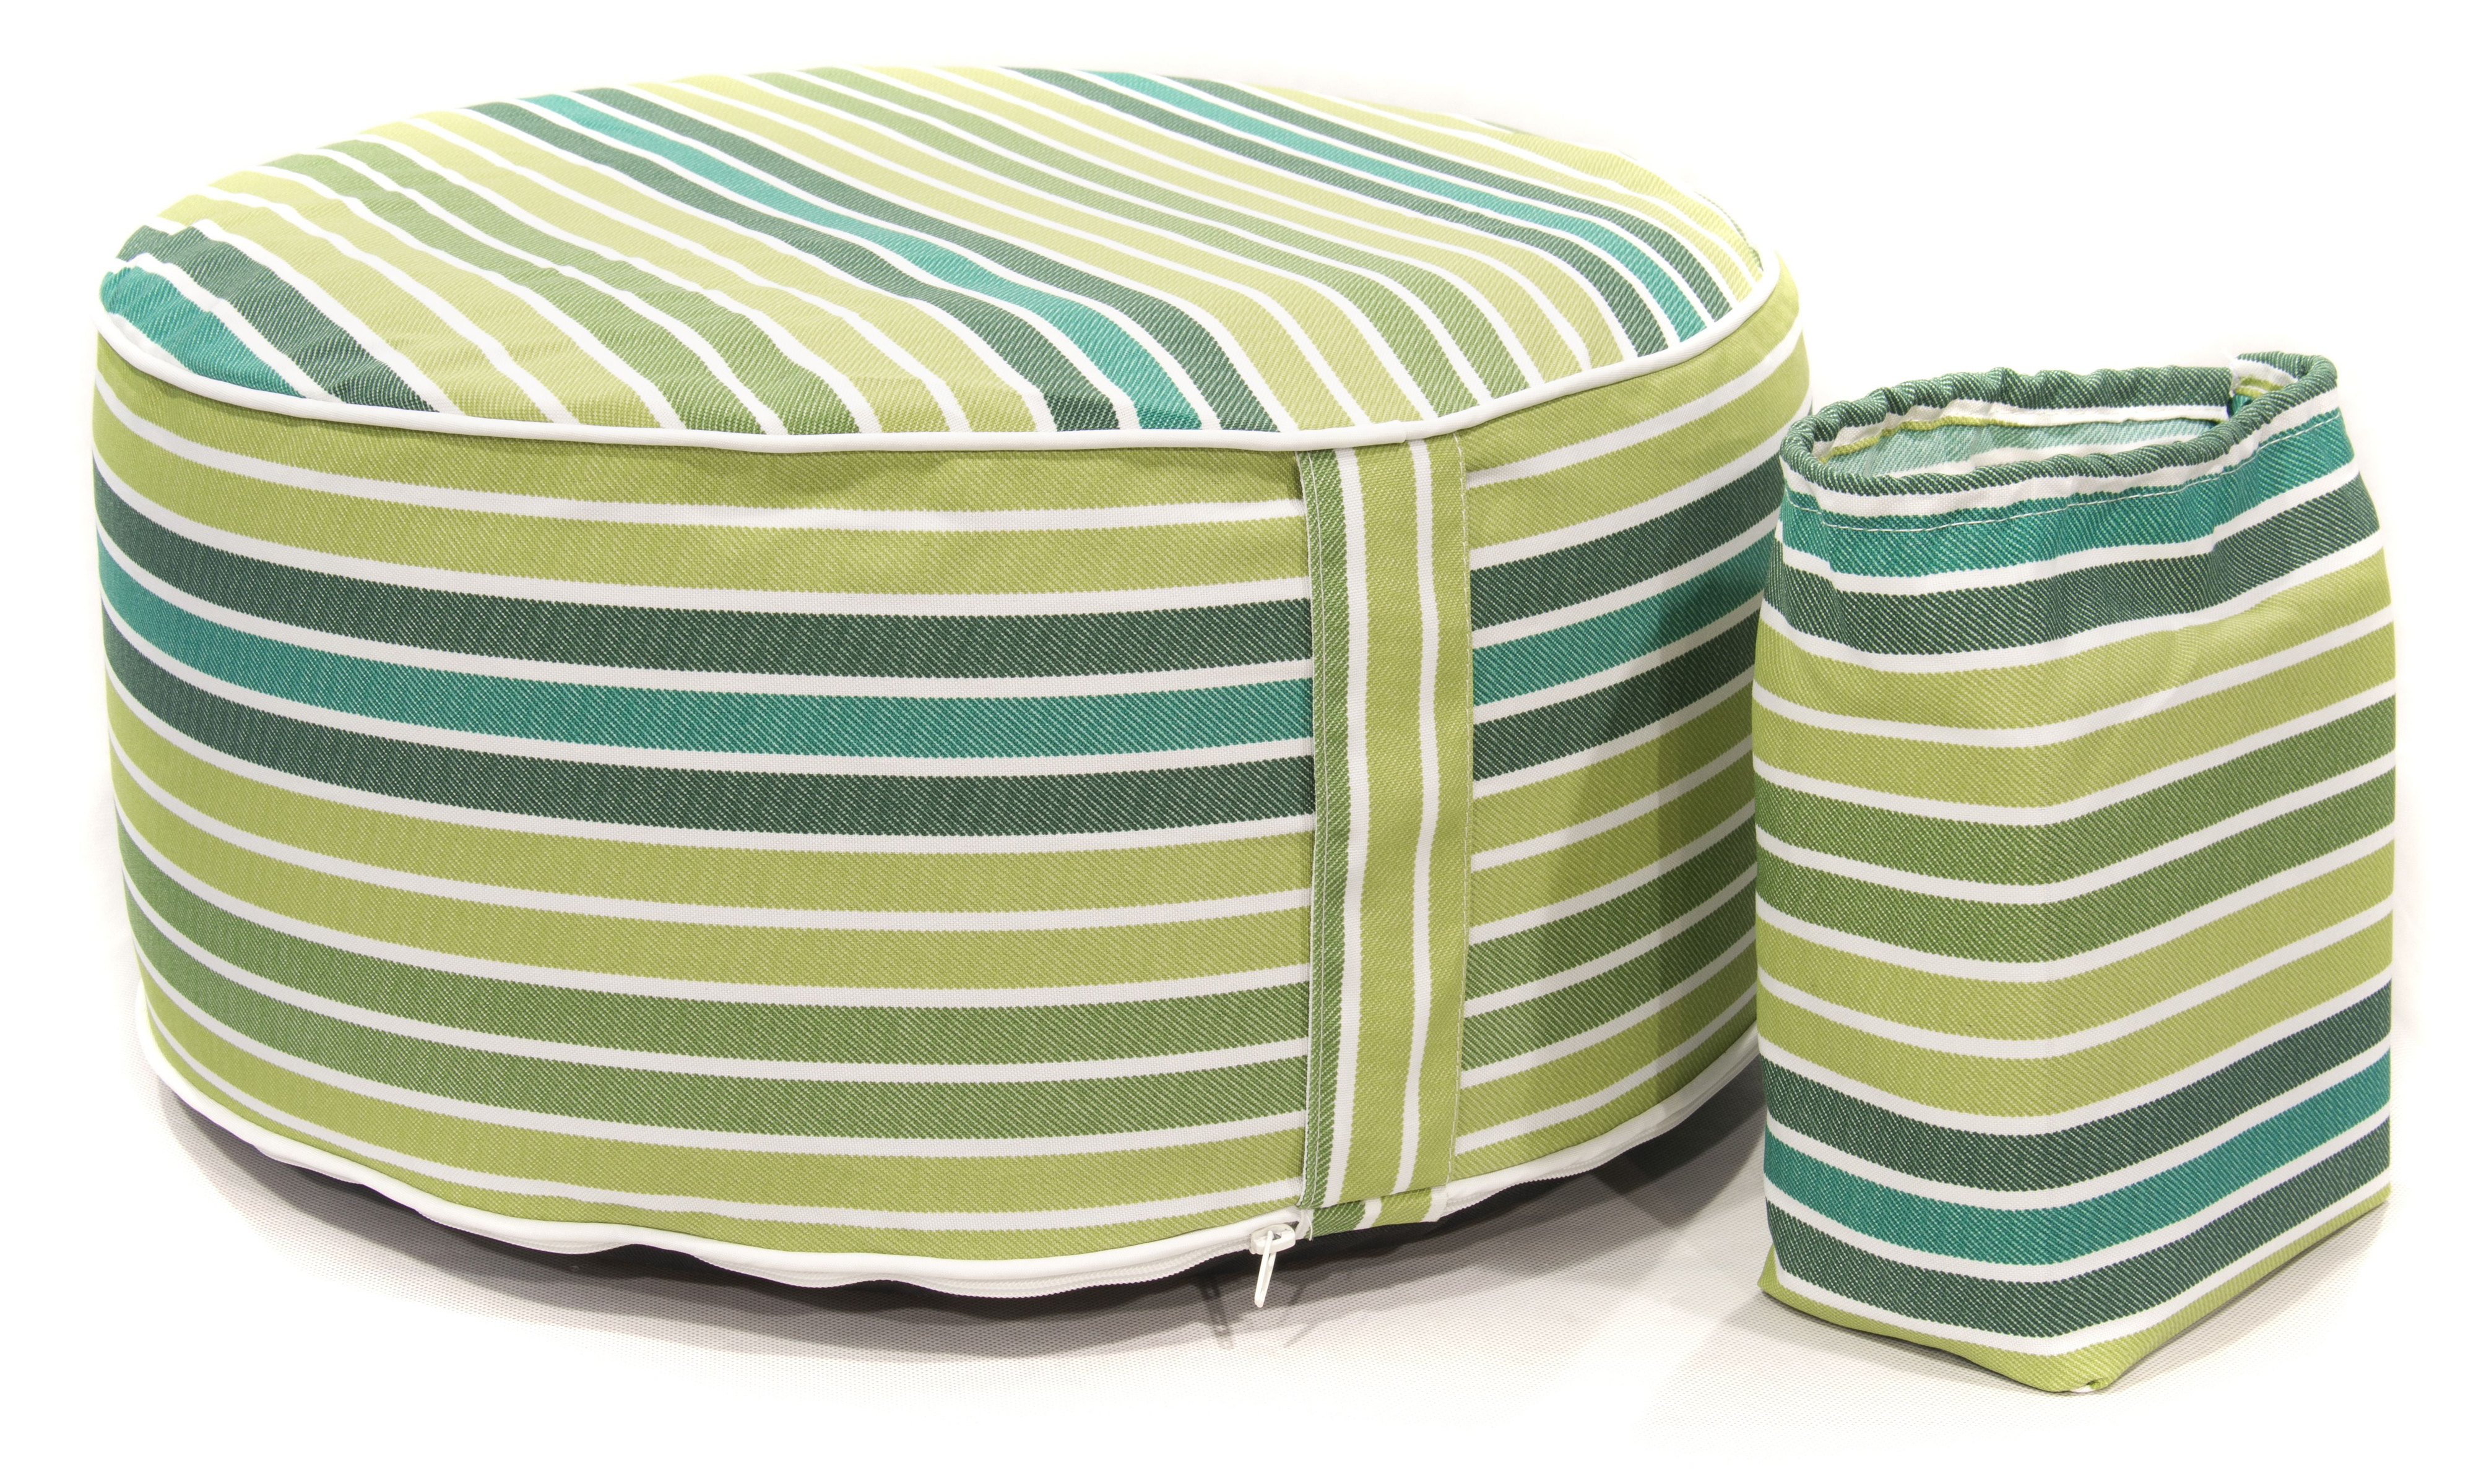 the inflatable ottoman in striped green pattern